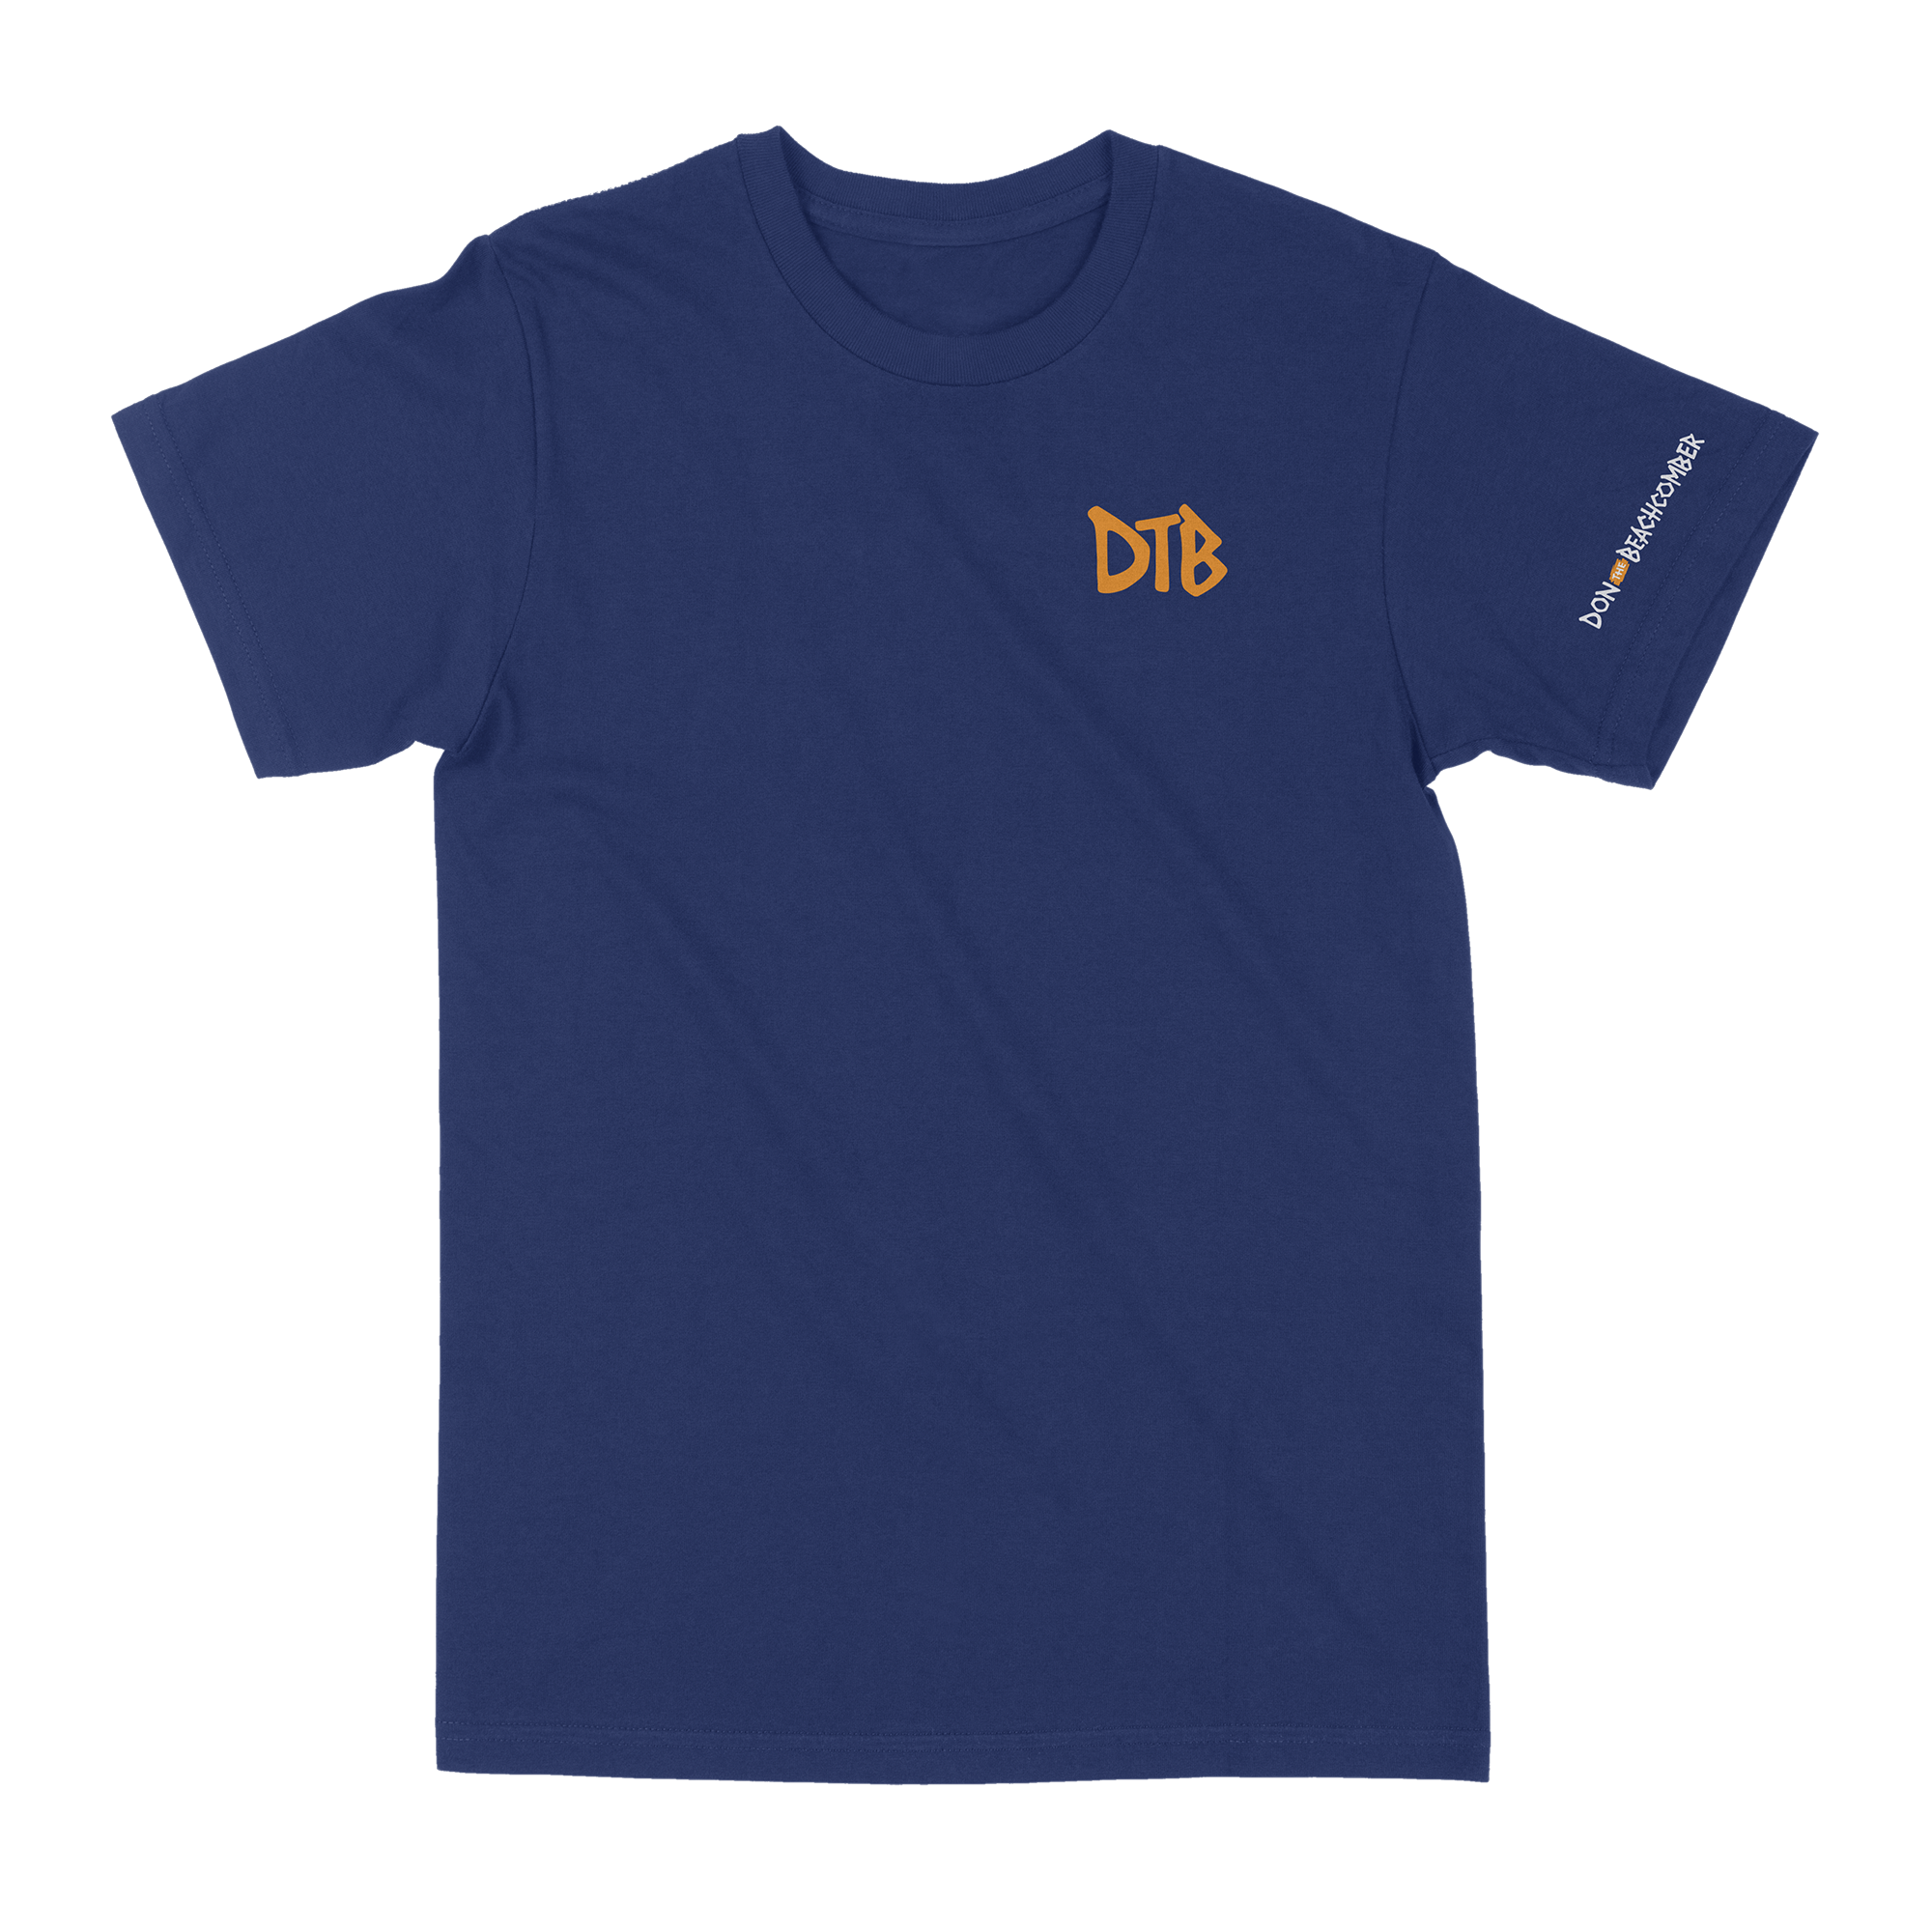 Navy blue T-Shirt with “DTB” logo printed on the left front chest, and a silhouette bust of Donn Beach on the center back with “The Legend Returns” written under the silhouette.